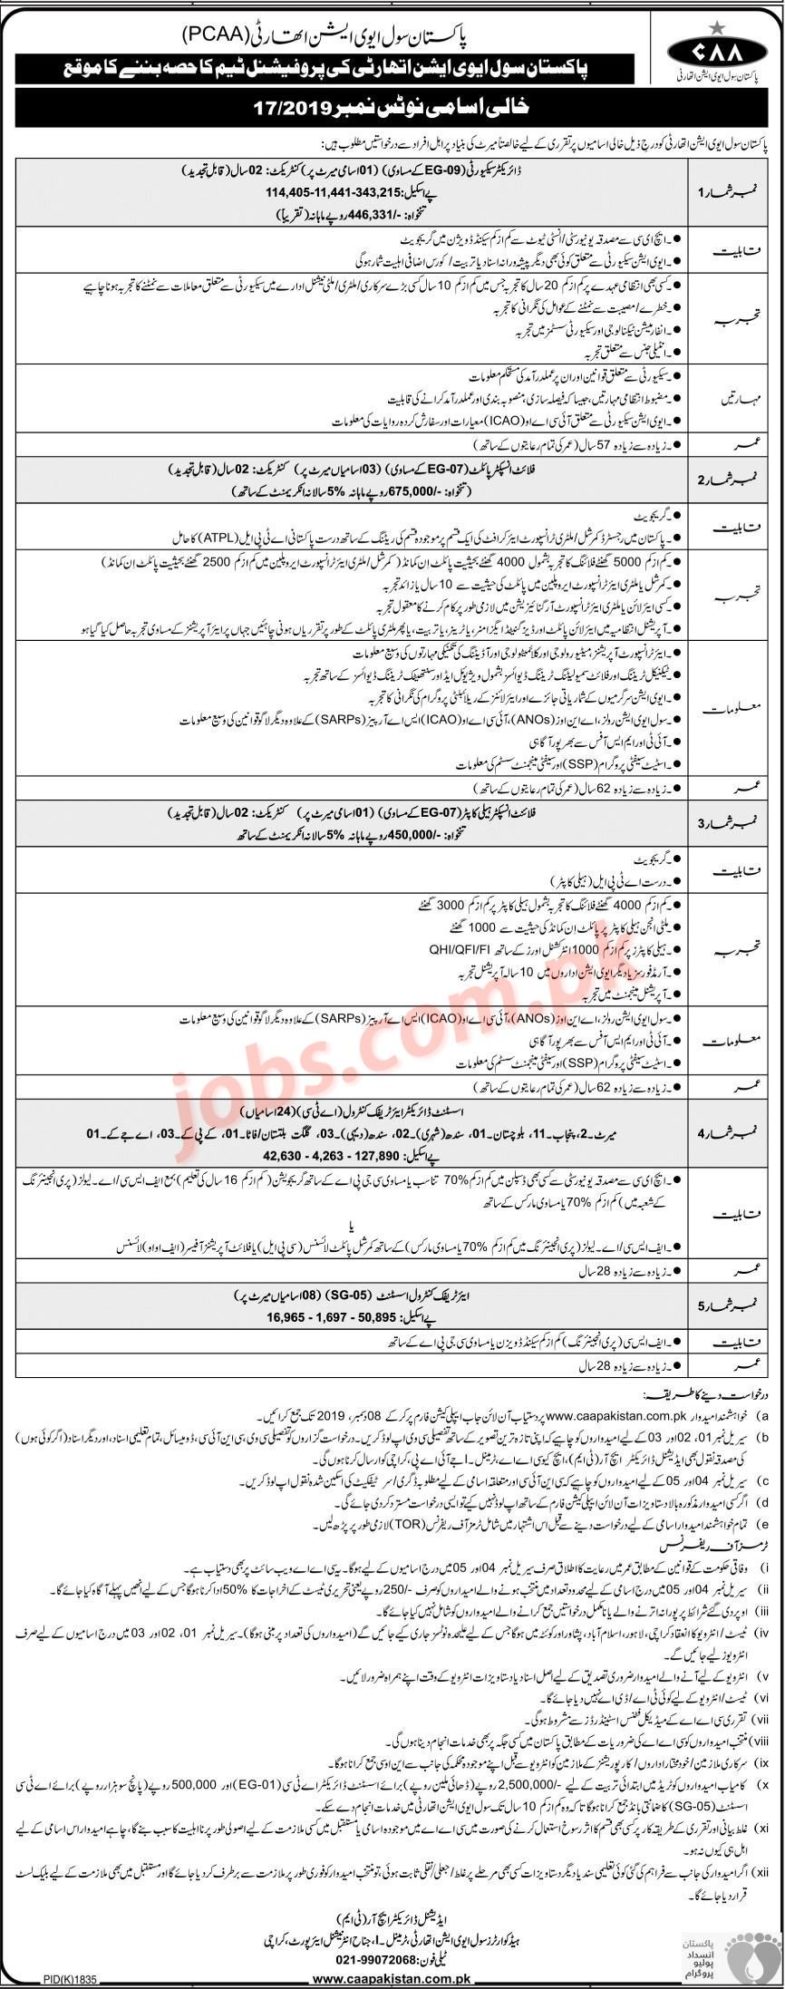 Pakistan,Civil,Aviation,Authority,(PCAA),Jobs,2019,for,37+,Air,Traffic,Control,Assistants,,Flight,Inspectors,,Assistant,Directors,and,Other Posted:,23,Nov,2019,11:52,PM,PST Pakistan,Civil,Aviation,Authority,(PCAA),Jobs,2019:,PCAA,is,inviting,applications,from,eligible,candidates,for,37+,Air,Traffic,Control,Assistants,,Flight,Inspectors,,Assistant,Directors,and,Other.,Required,qualification,from,a... , ,